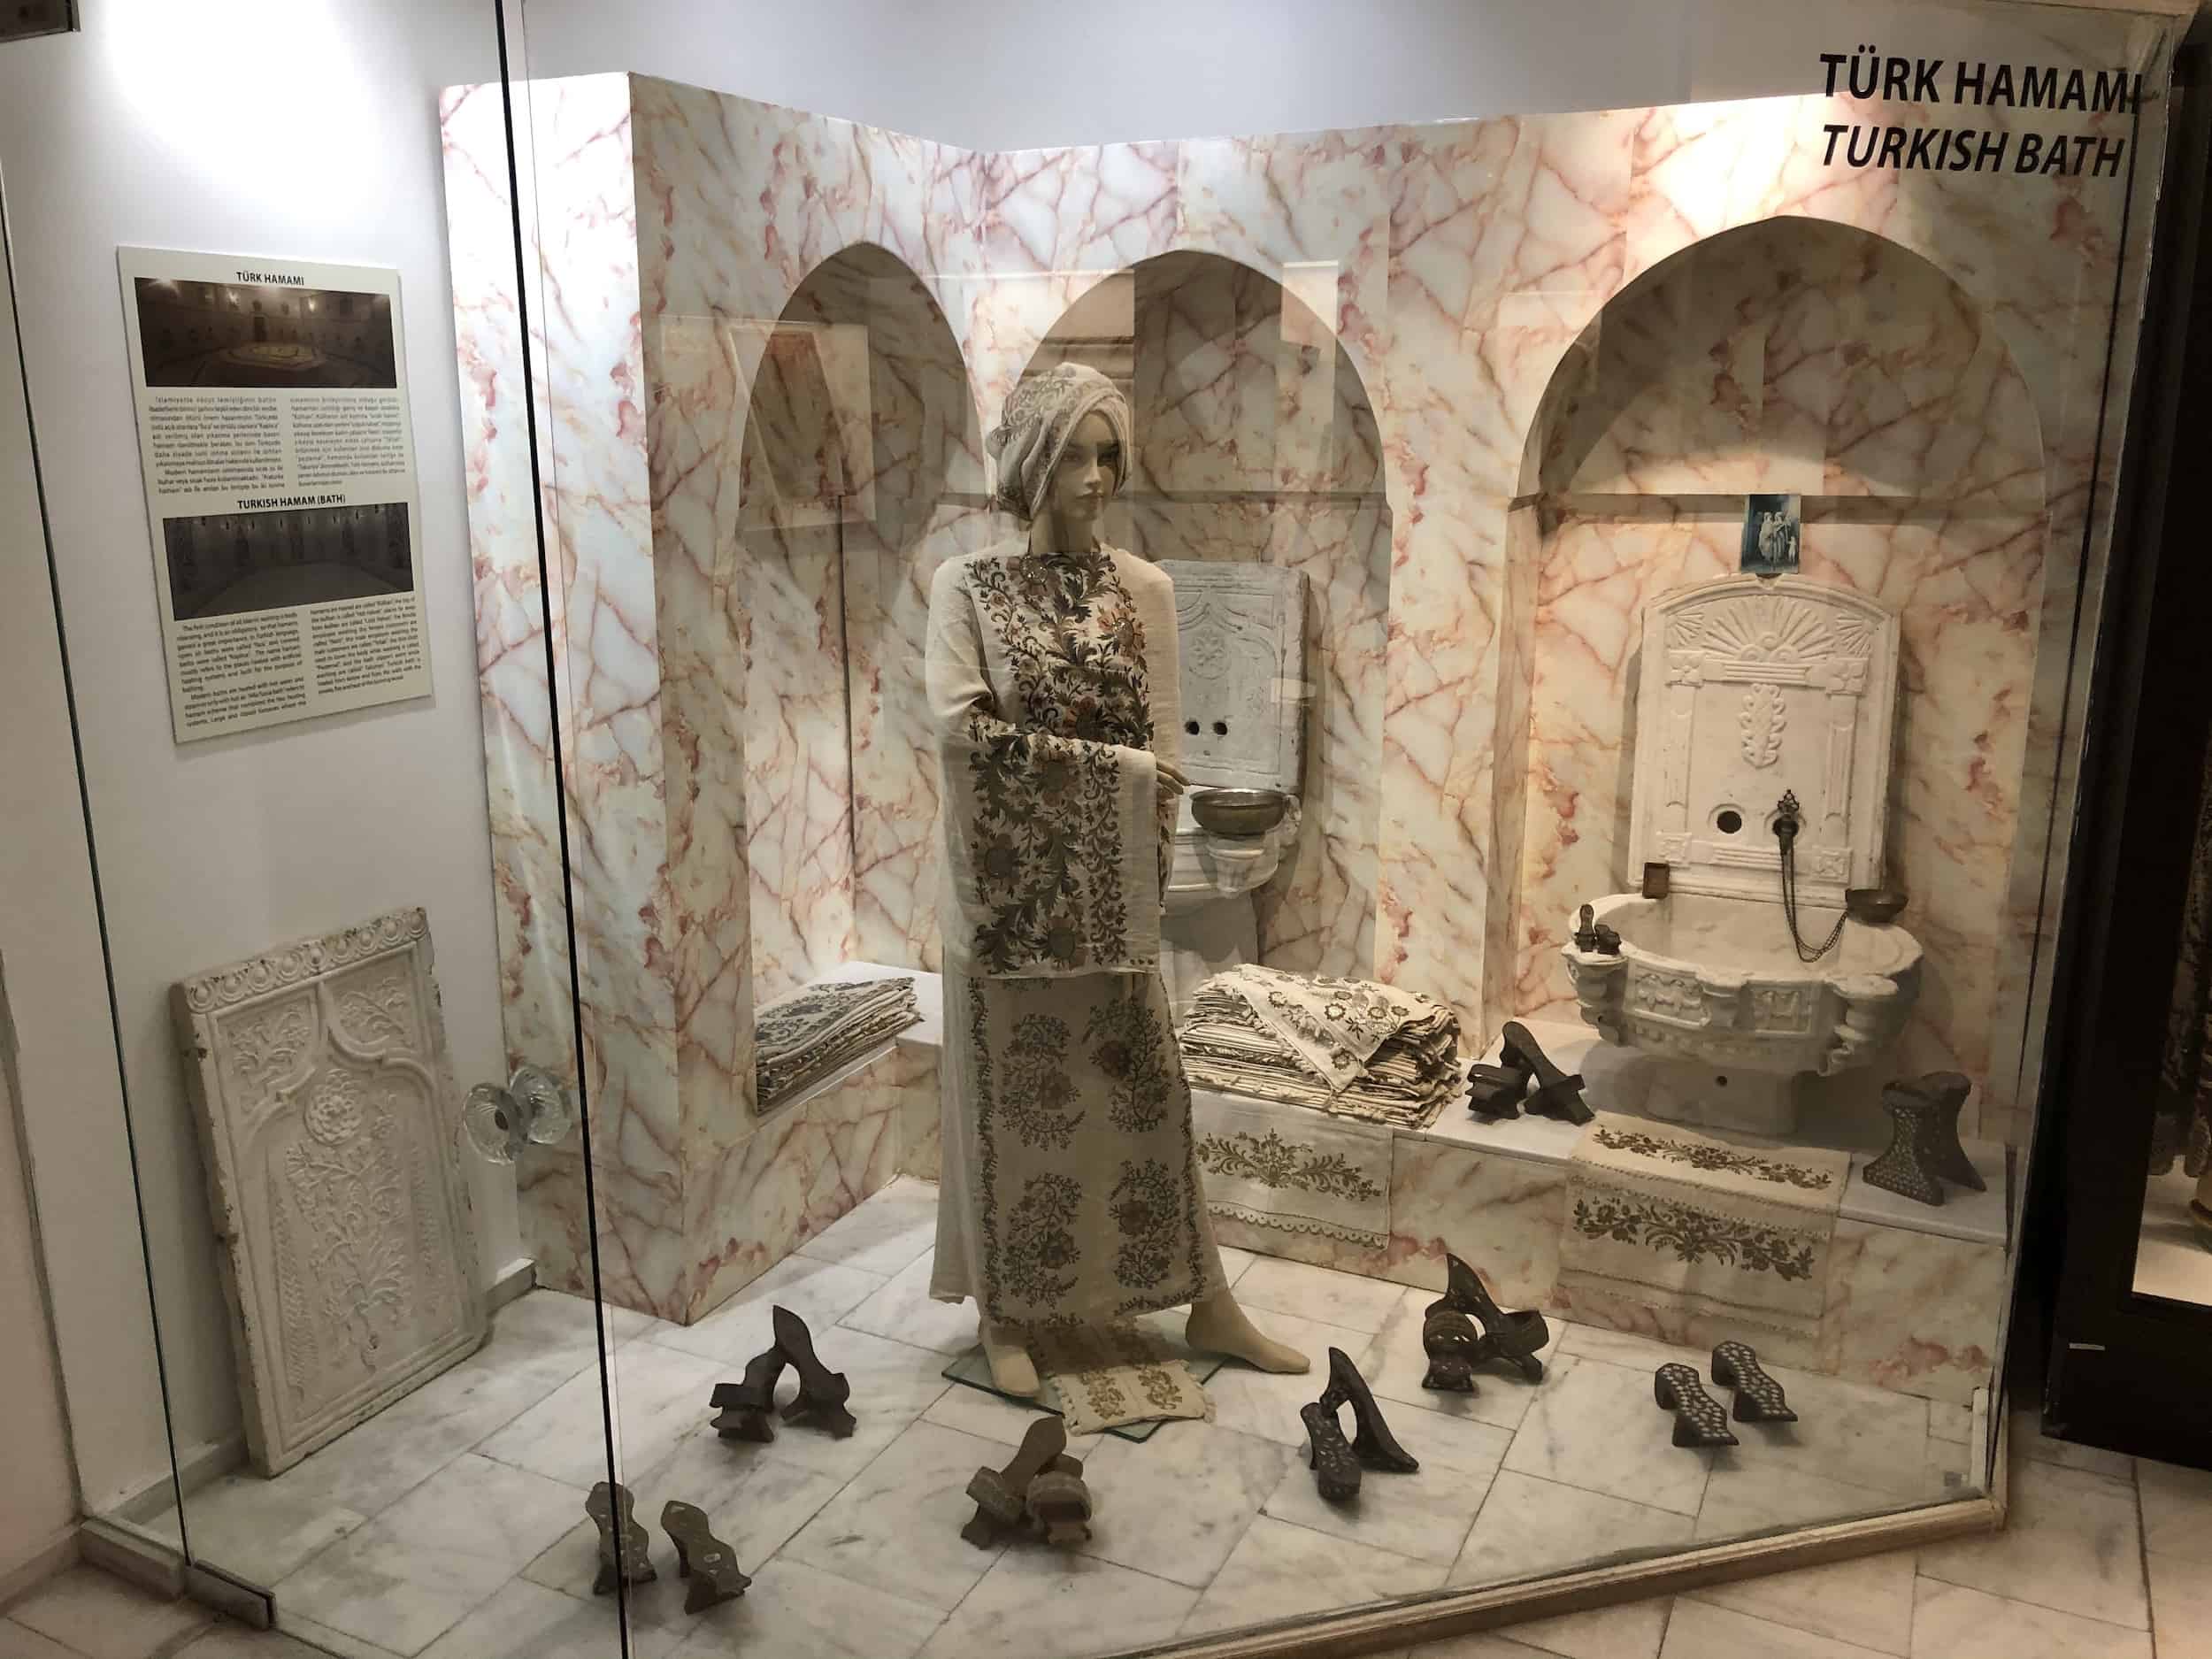 Turkish hamam at the Edirne Archaeology and Ethnography Museum in Edirne, Turkey